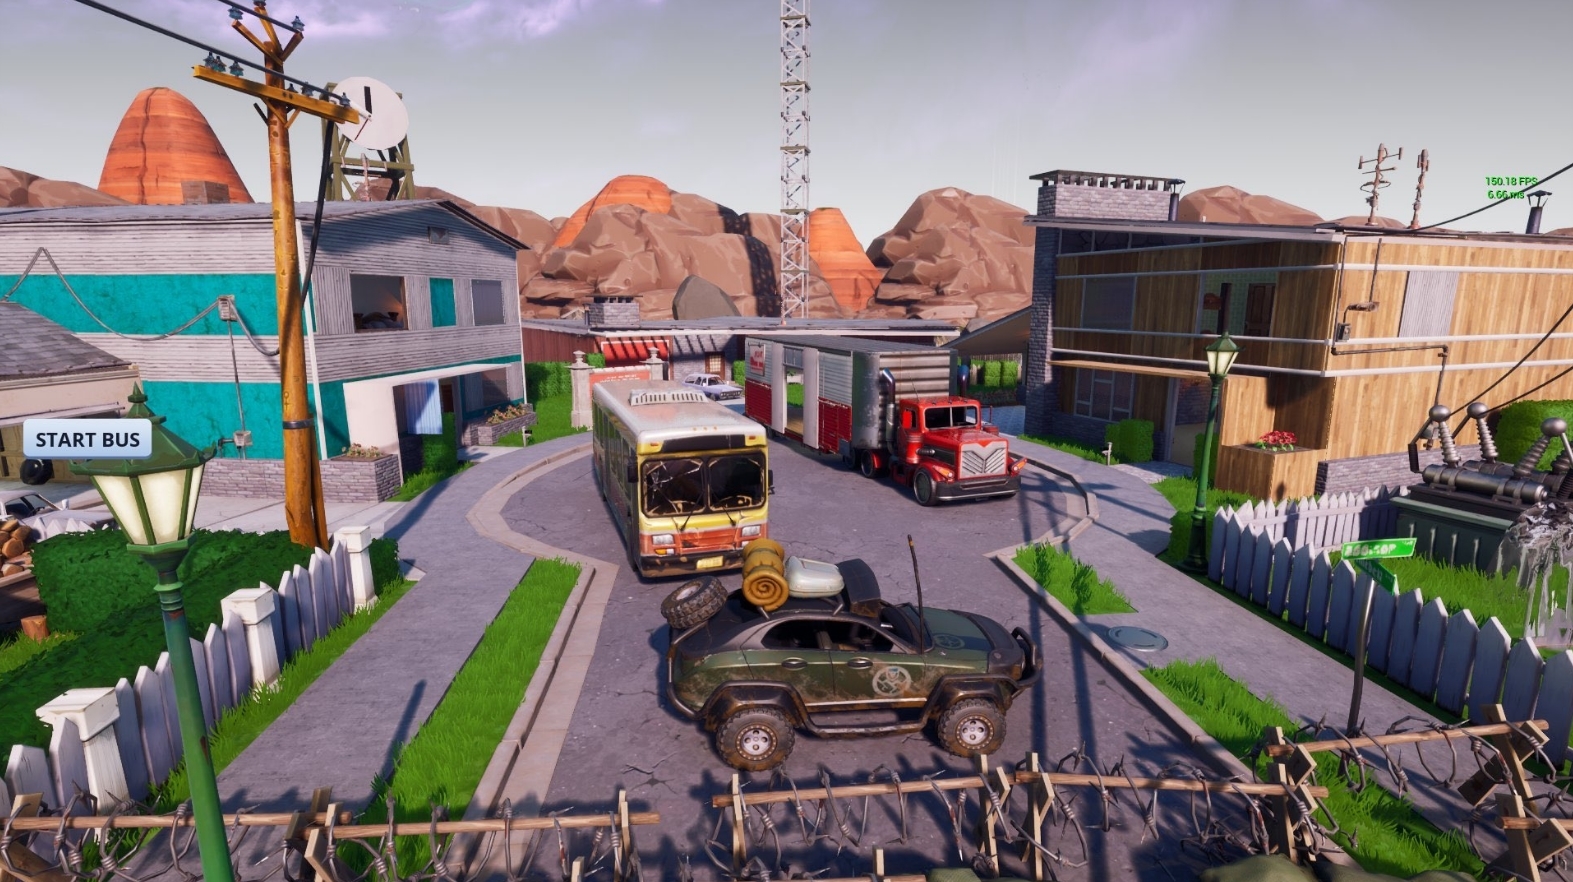 Call Of Duty S Nuketown Has Been Recreated In Fortnite With